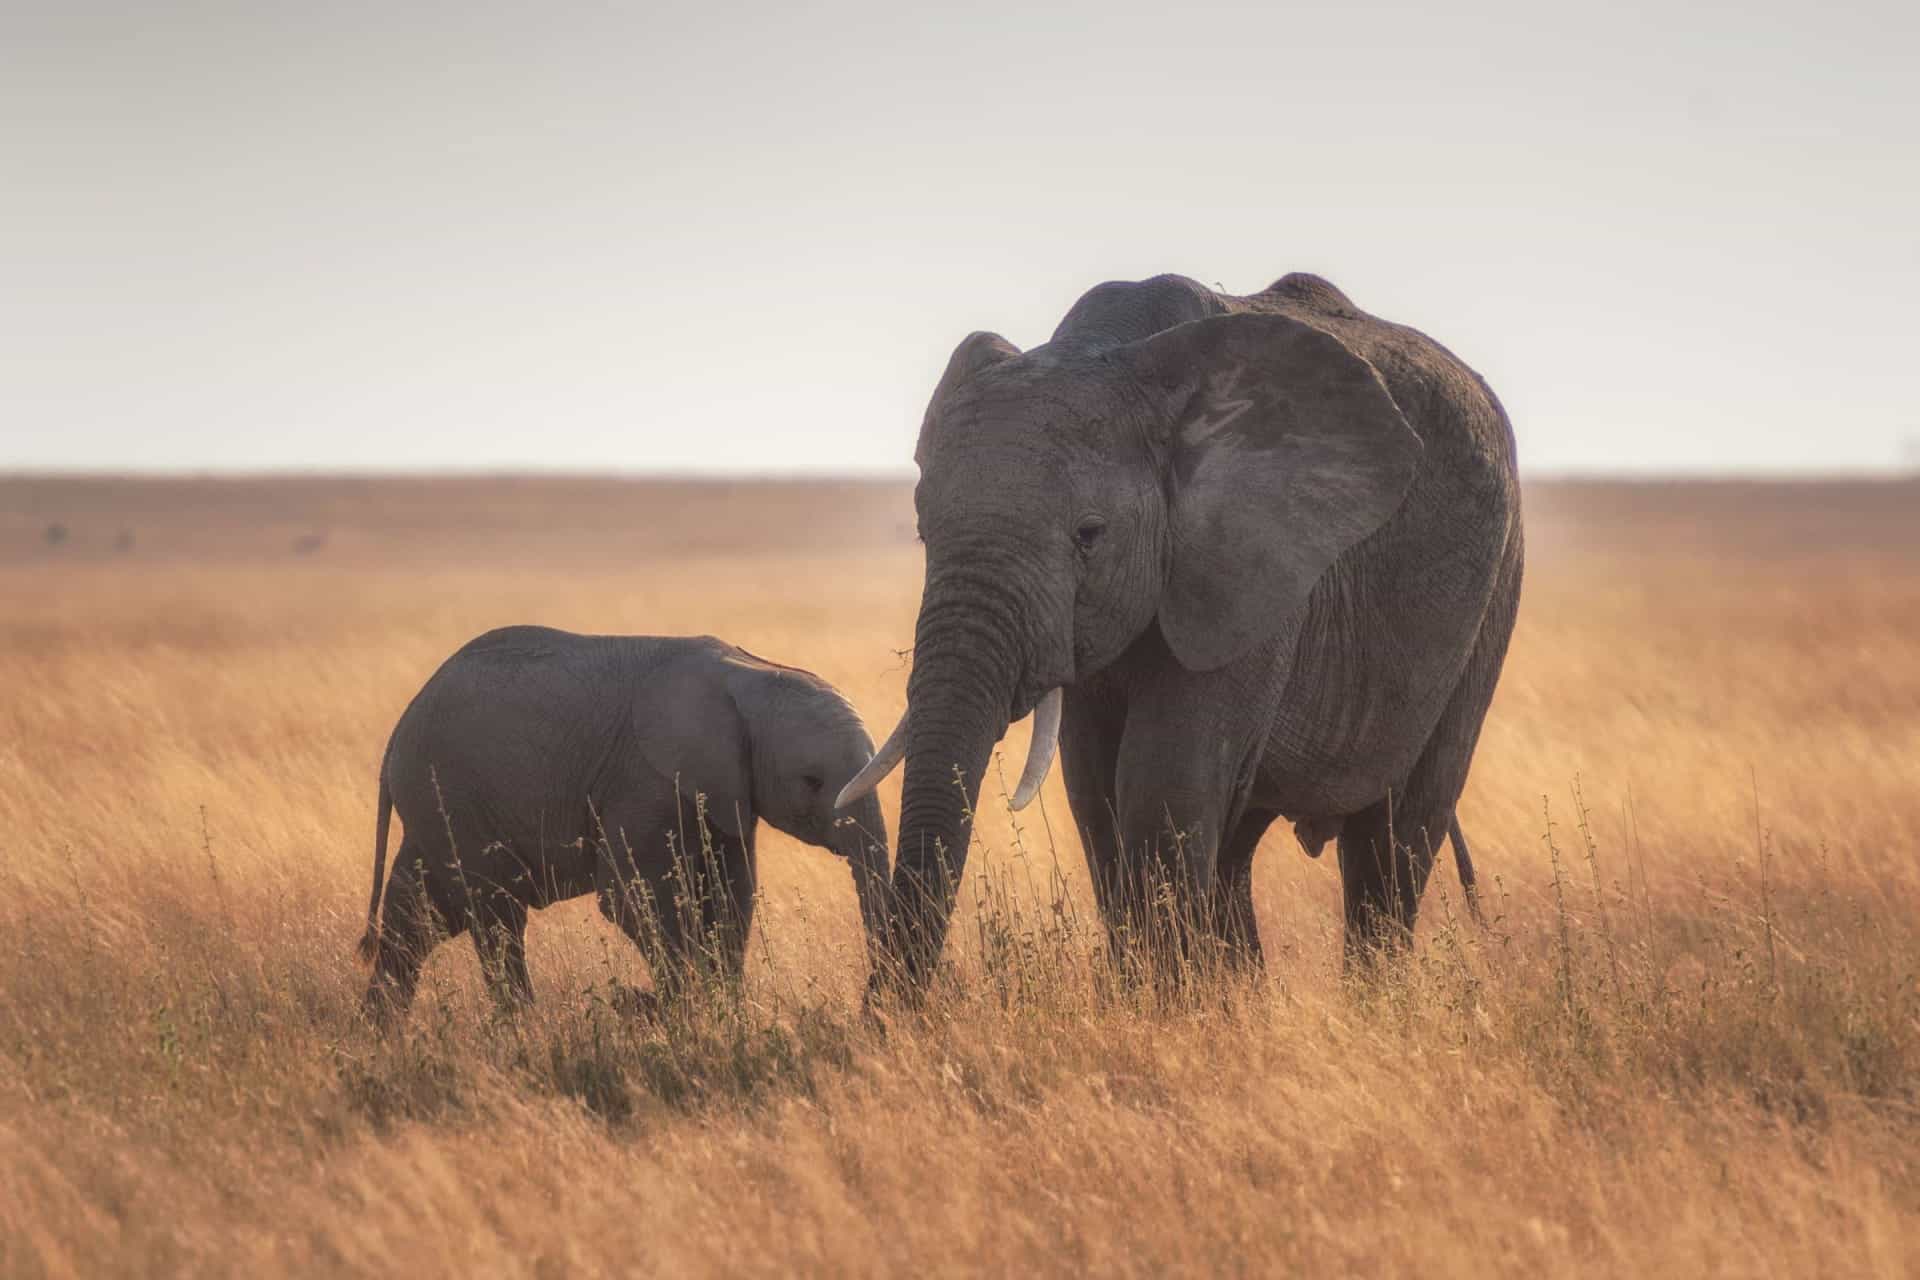 A baby elephant wanders under the guidance of its parent.